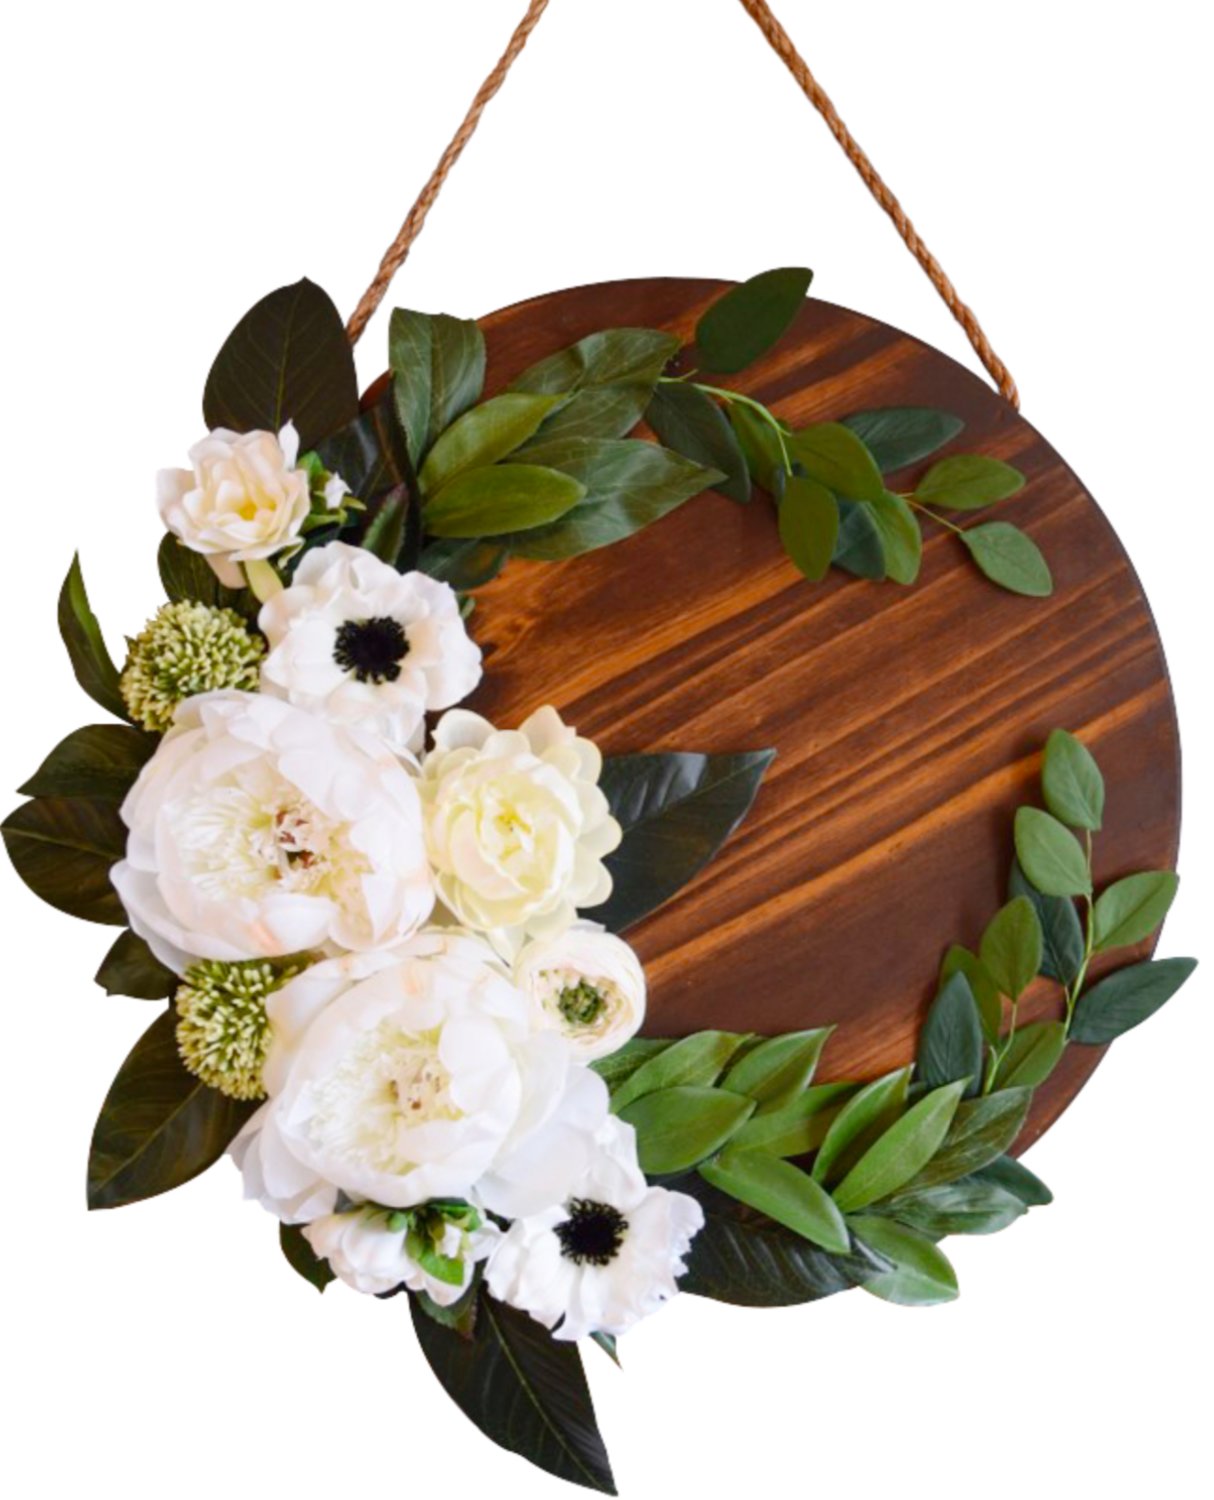 Thanks to a wide mix of faux fruits and florals, wreaths can be reused time and time again, inside or outside. The Bread and Butter Wreath, $129.